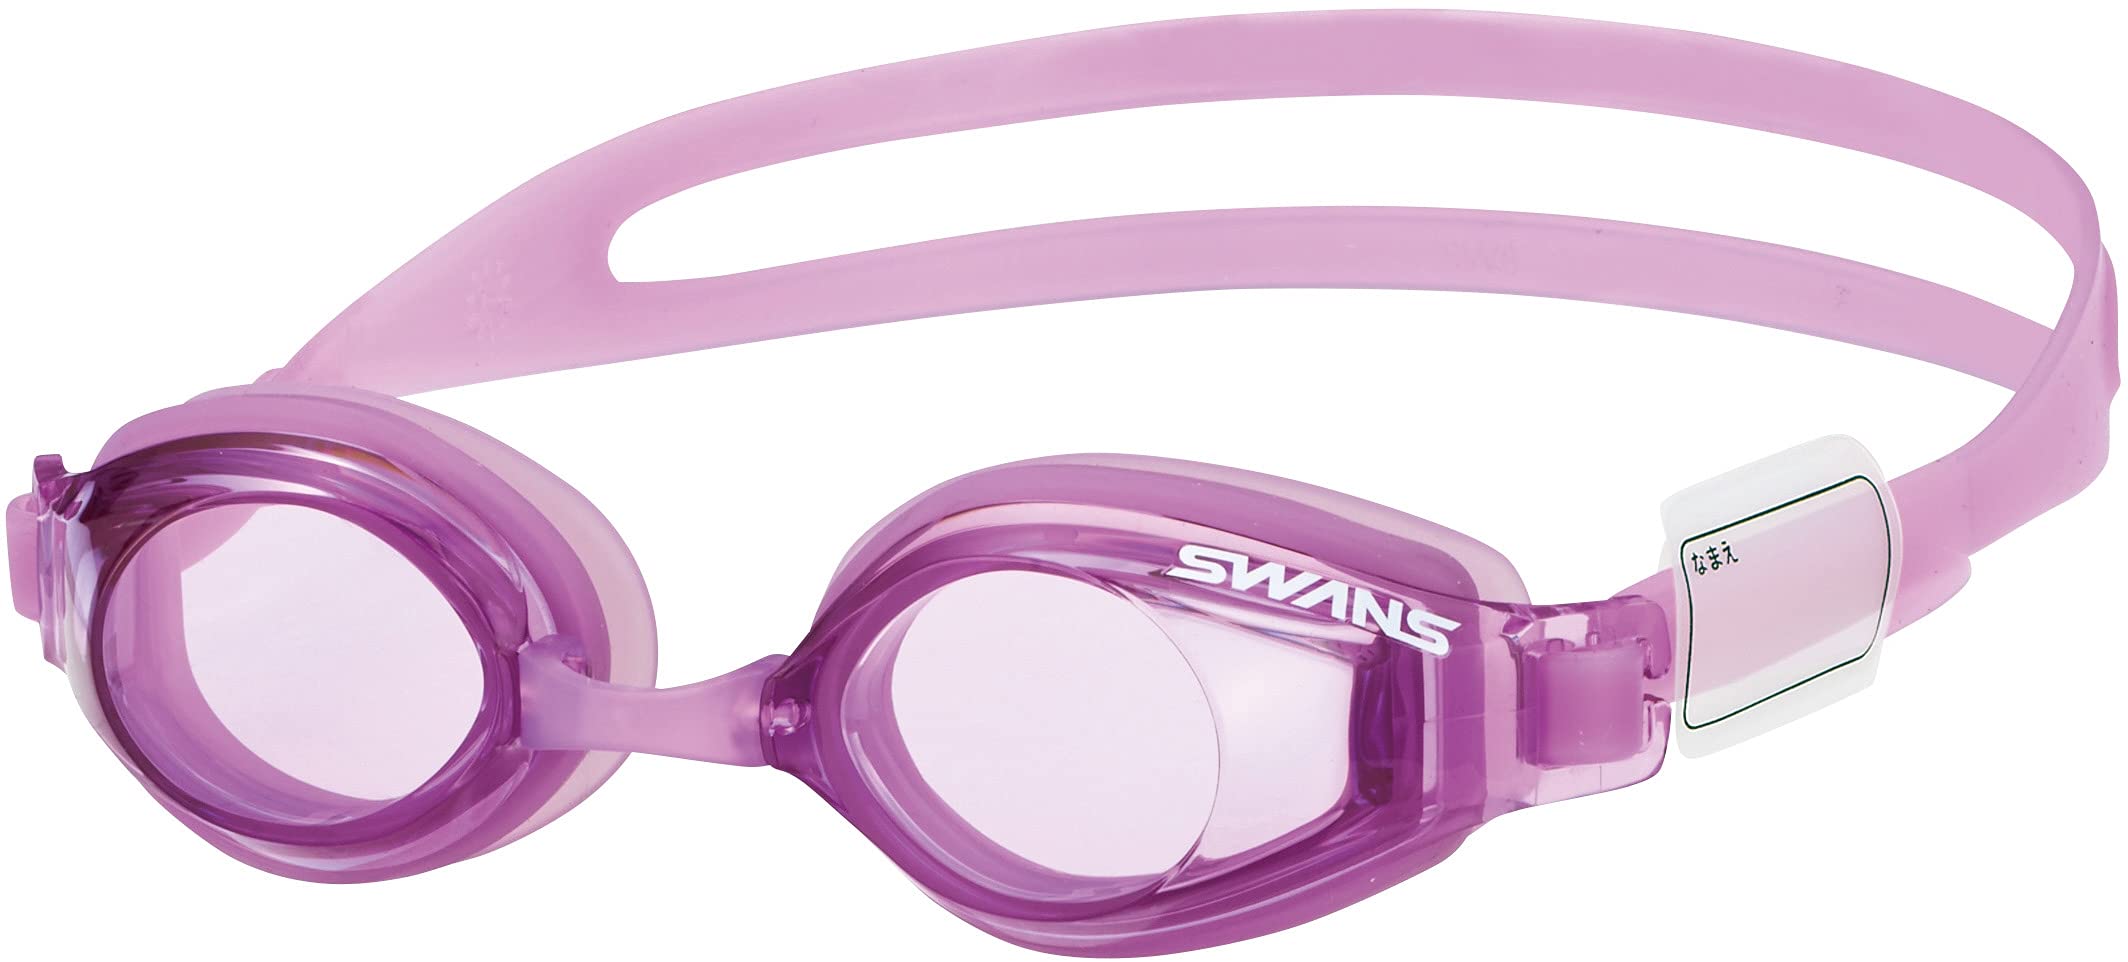 SWANS( Swanz ) made in Japan swimming goggle SJ-24N LAV lavender for children 6 -years old ~12 -years old 